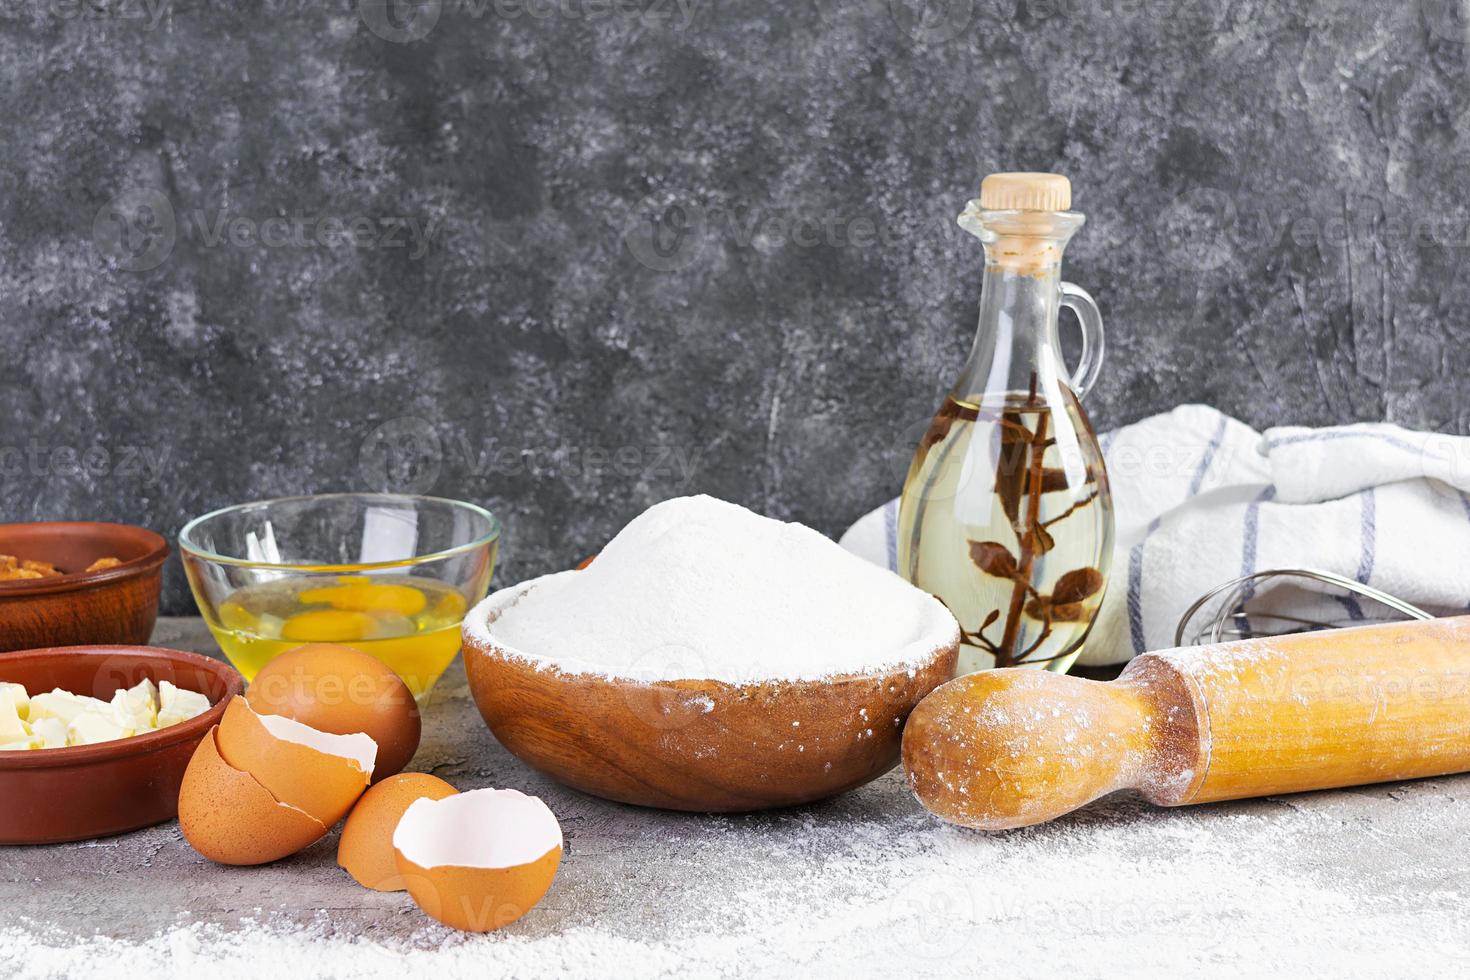 Flour and ingredients for making dough. Ingredients for baking pizza, bread, bakery photo